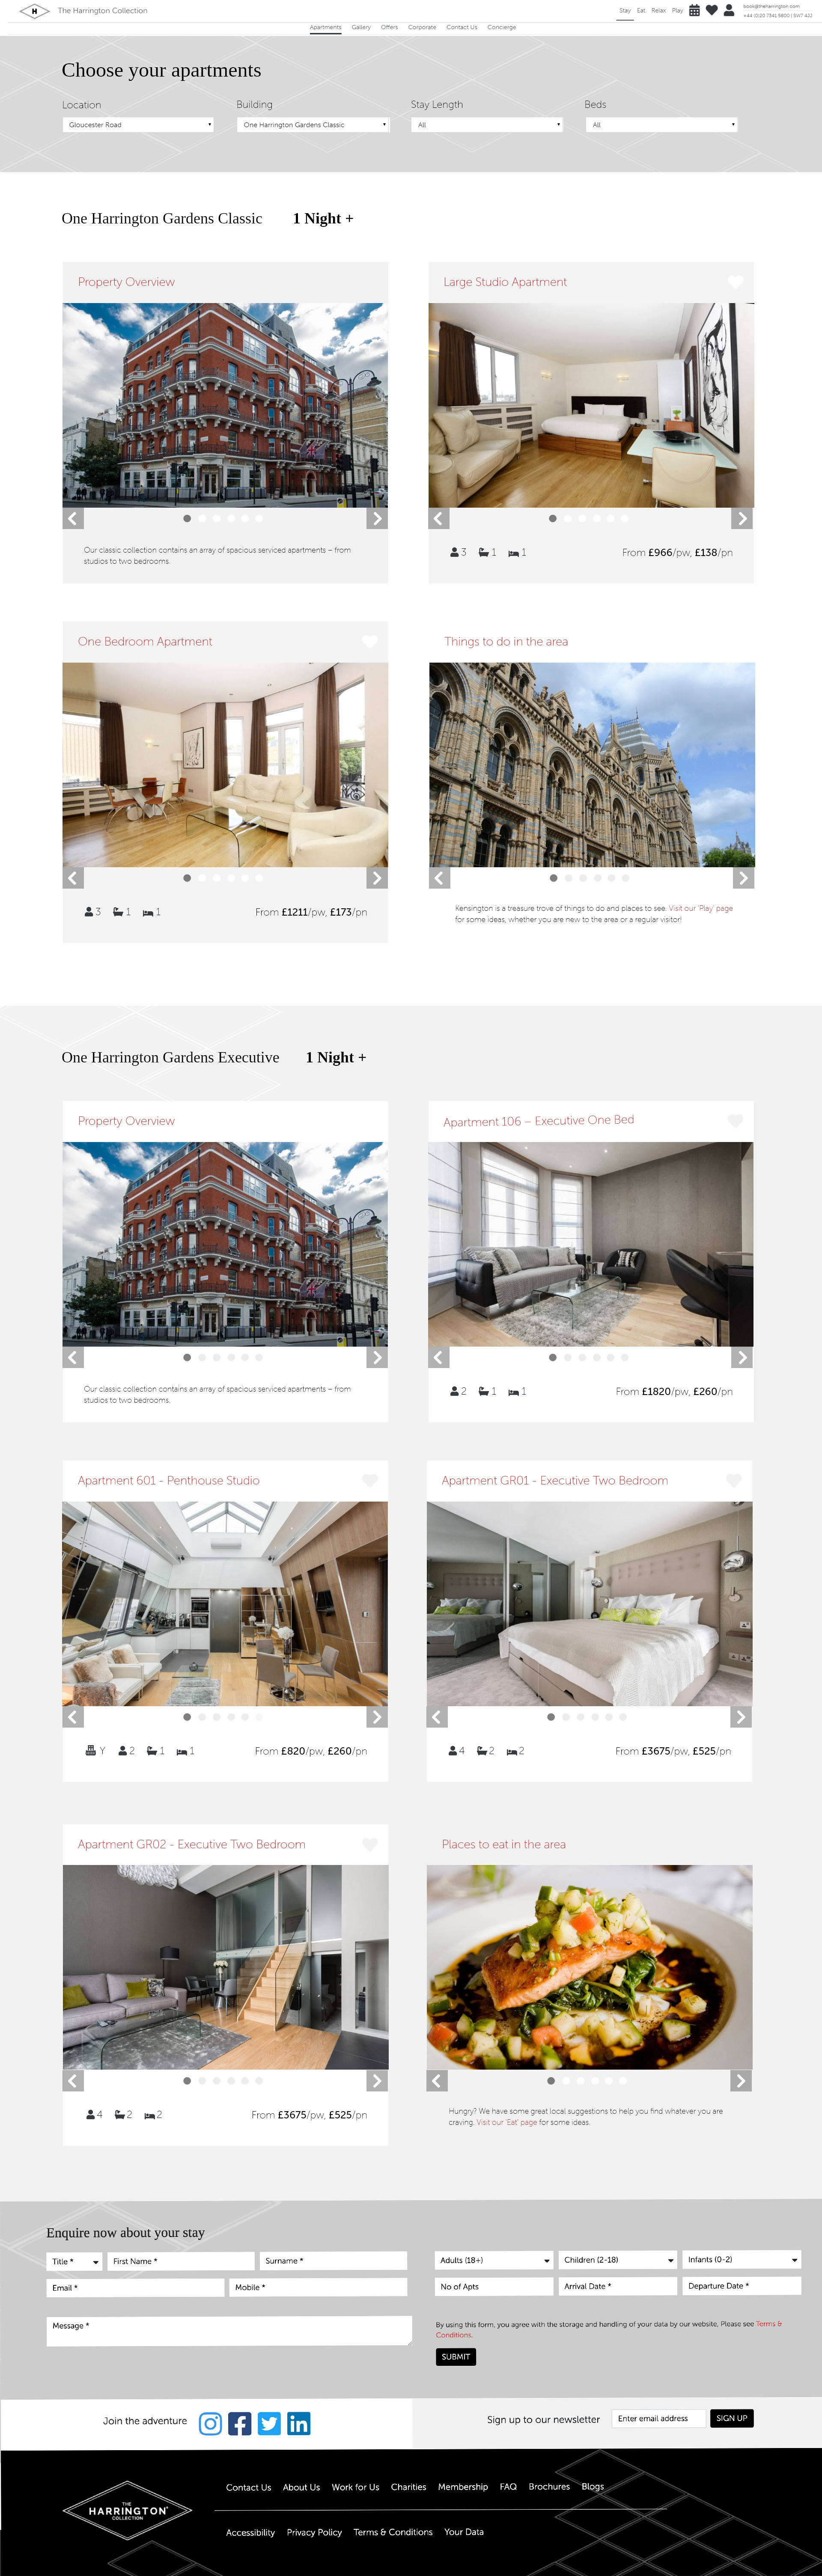 Apartment selection page